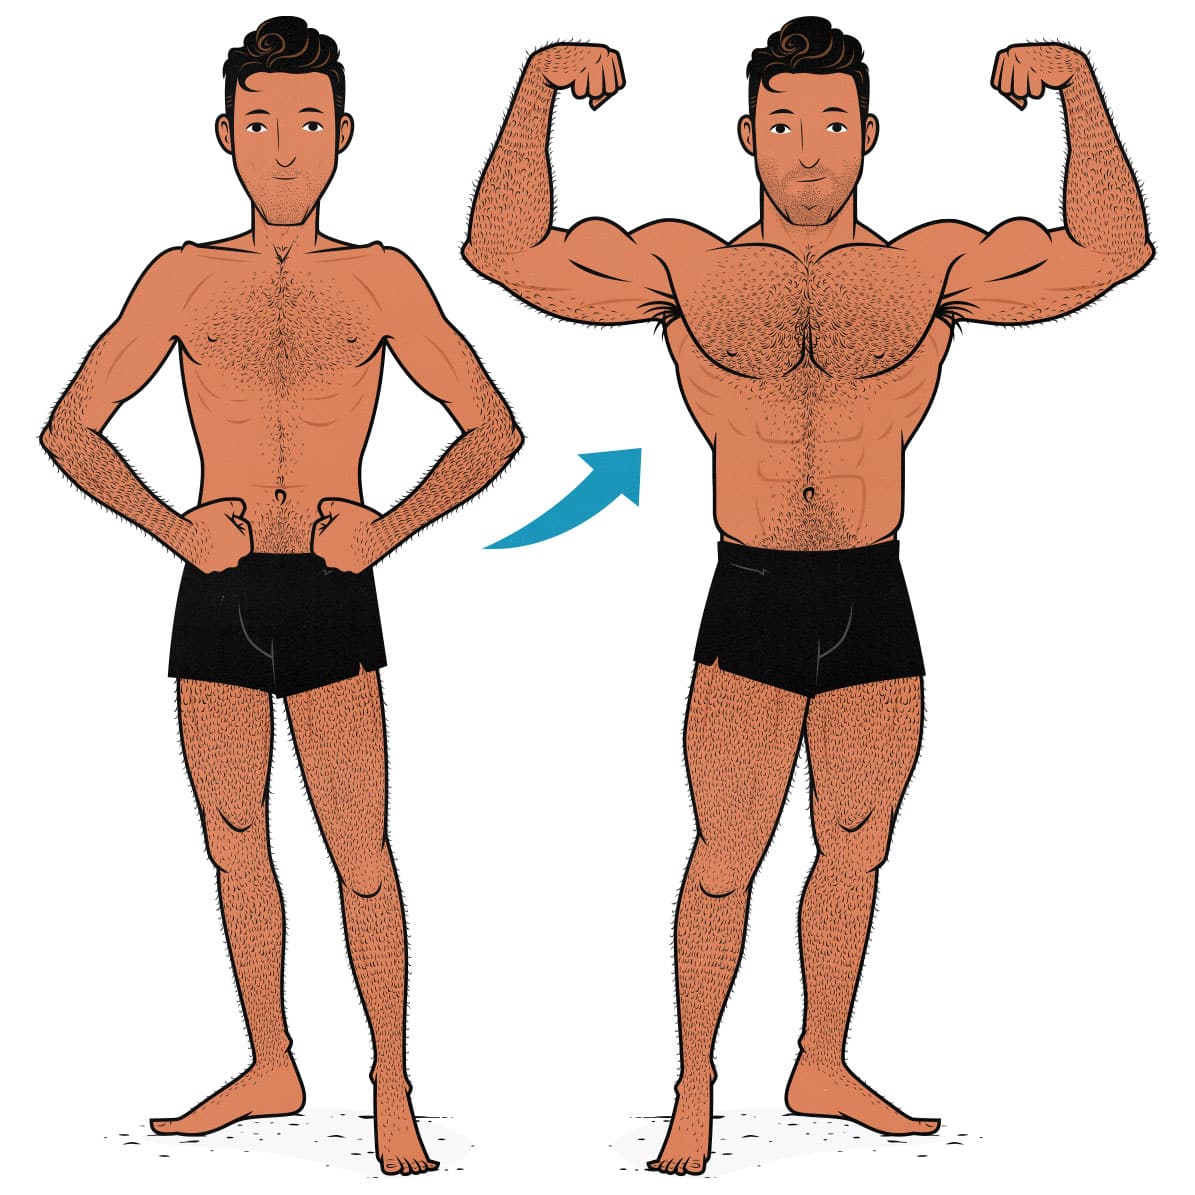 Cartoon illustration of a skinny guy bulking up and becoming muscular.